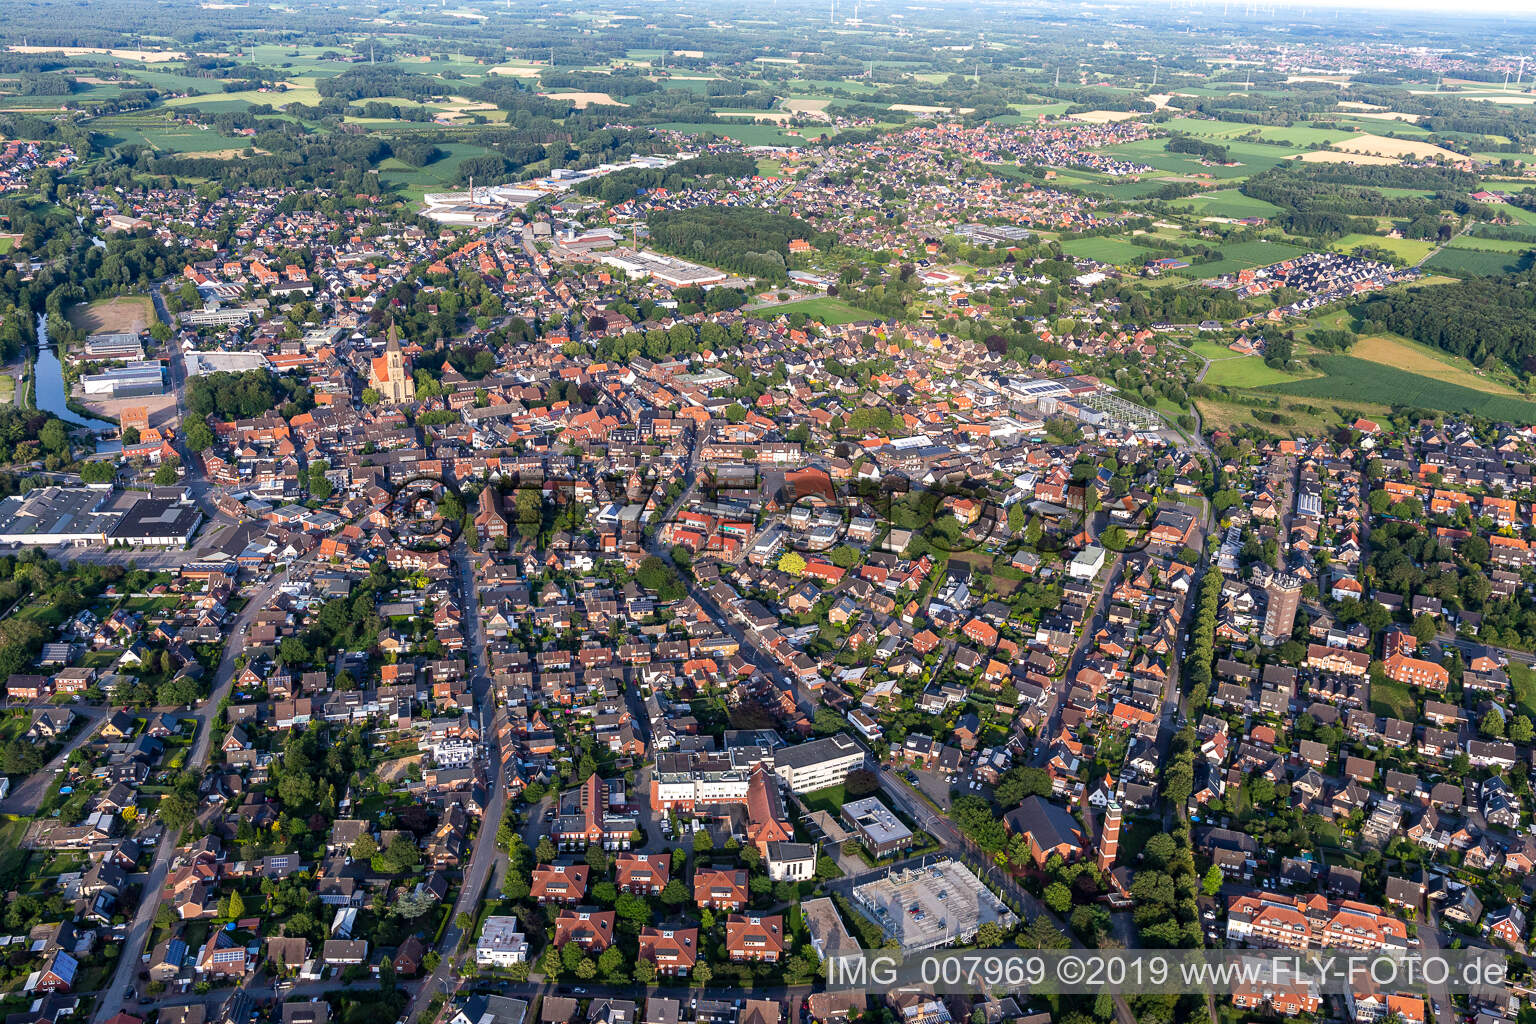 Stadtlohn in the state North Rhine-Westphalia, Germany from above